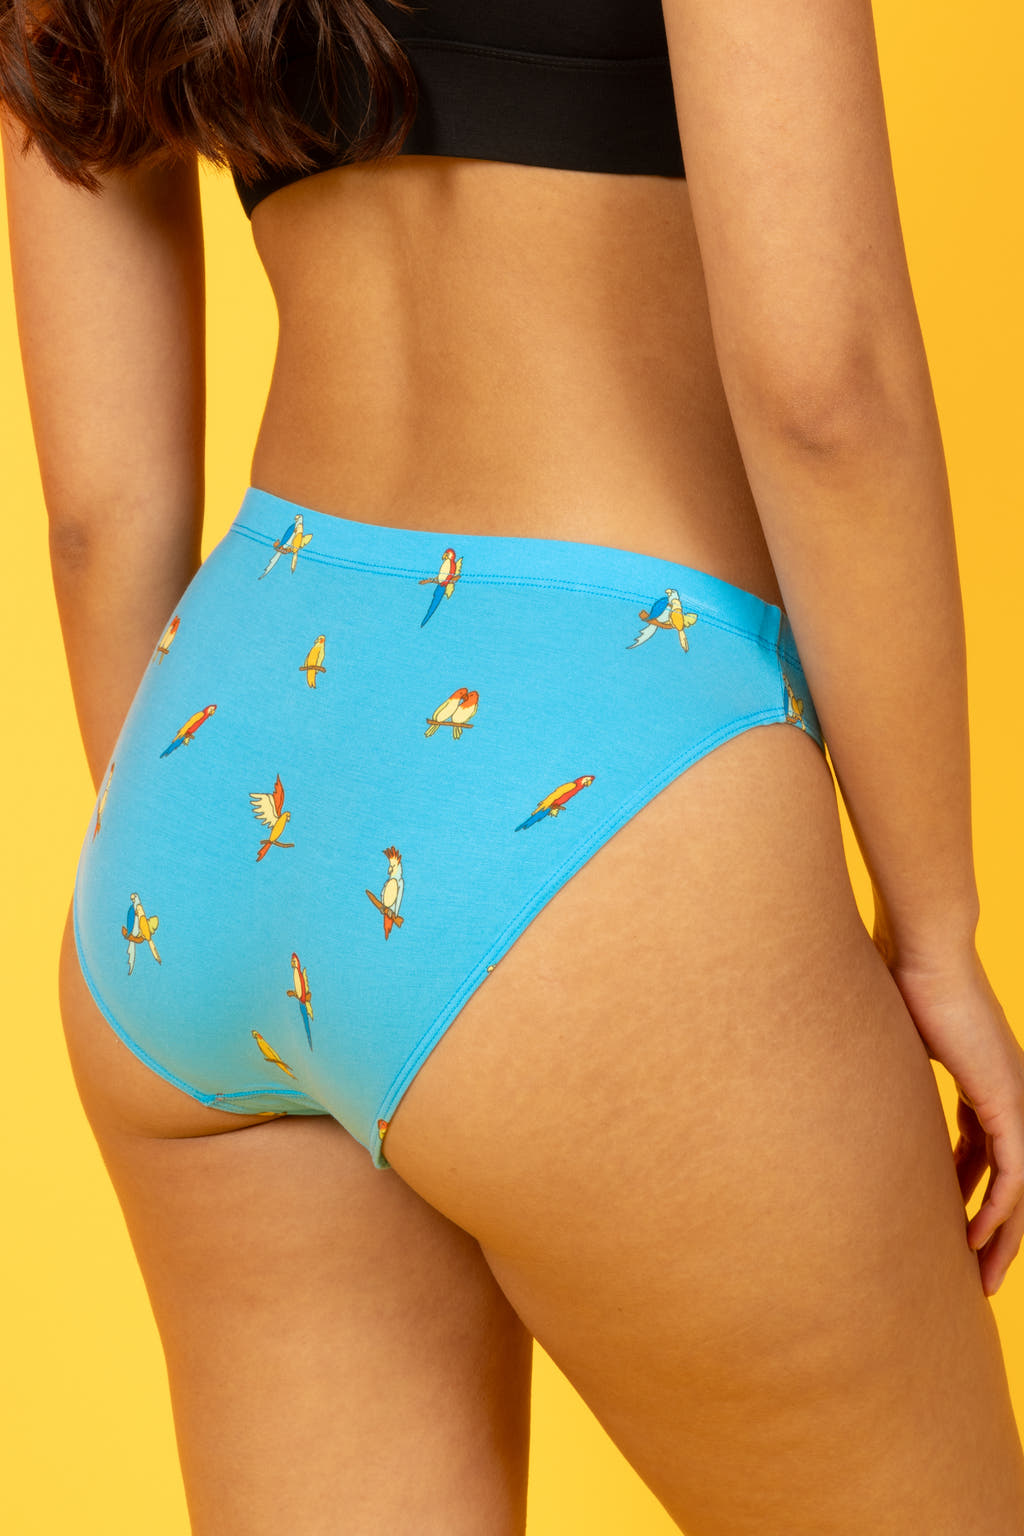 A woman wears The Tweet Yourself Parrot Modal Bikini Underwear, pondering bird sounds. Shinesty's quirky style shines through.